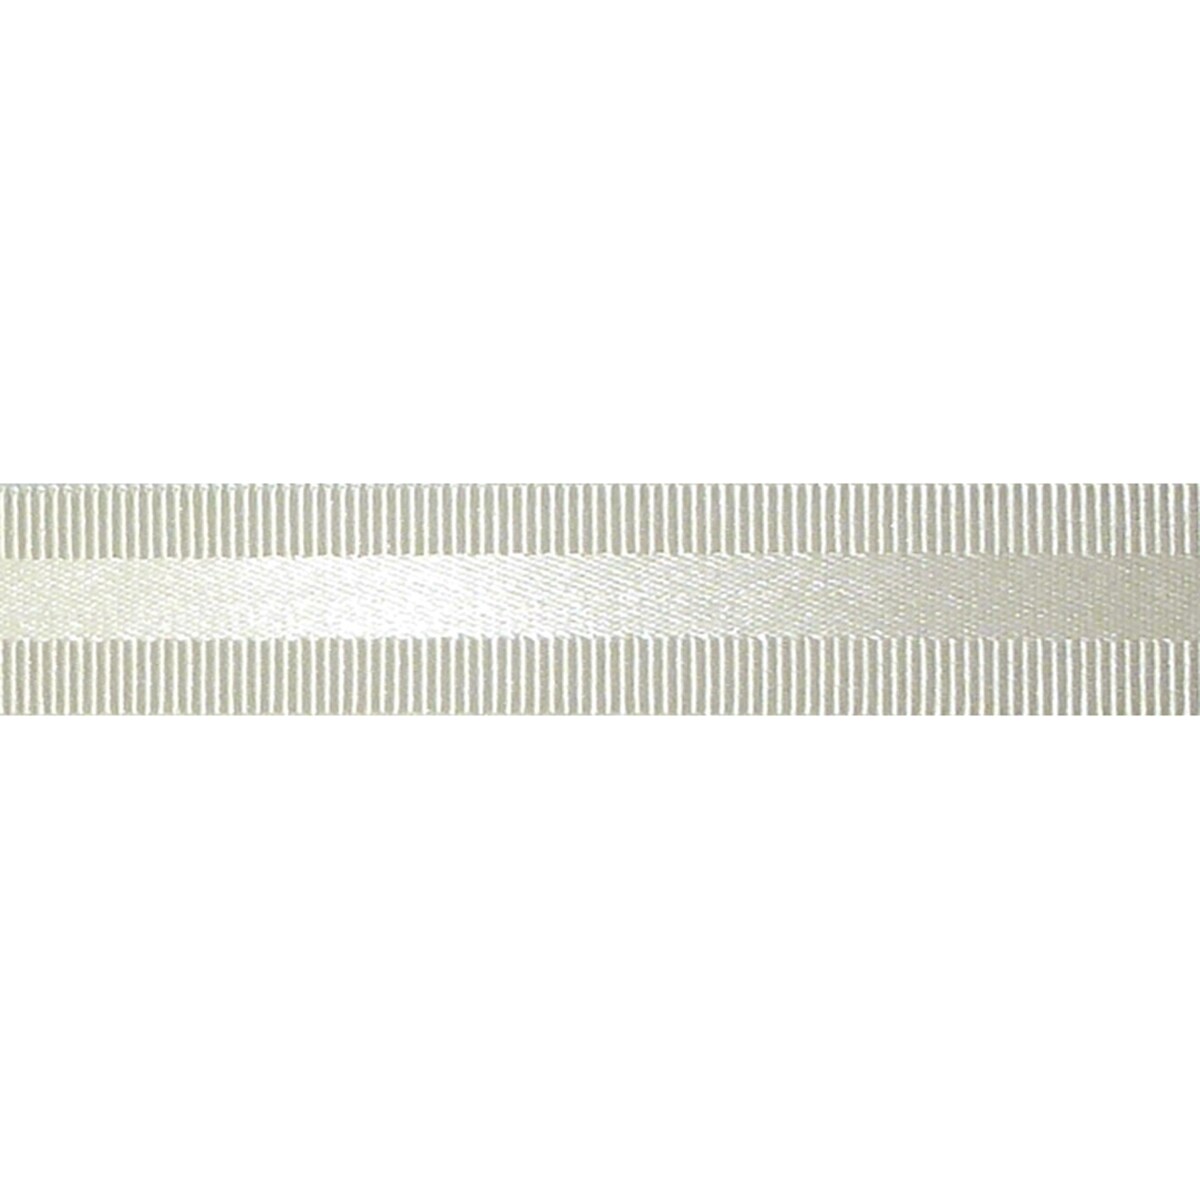 Ruban Smart Ribbon 3/4x27 Yards ivory (Ivory. 100% polyester. Machine washable; do not bleach; do not machine dry; may be ironed or dry cleaned. Imported. )